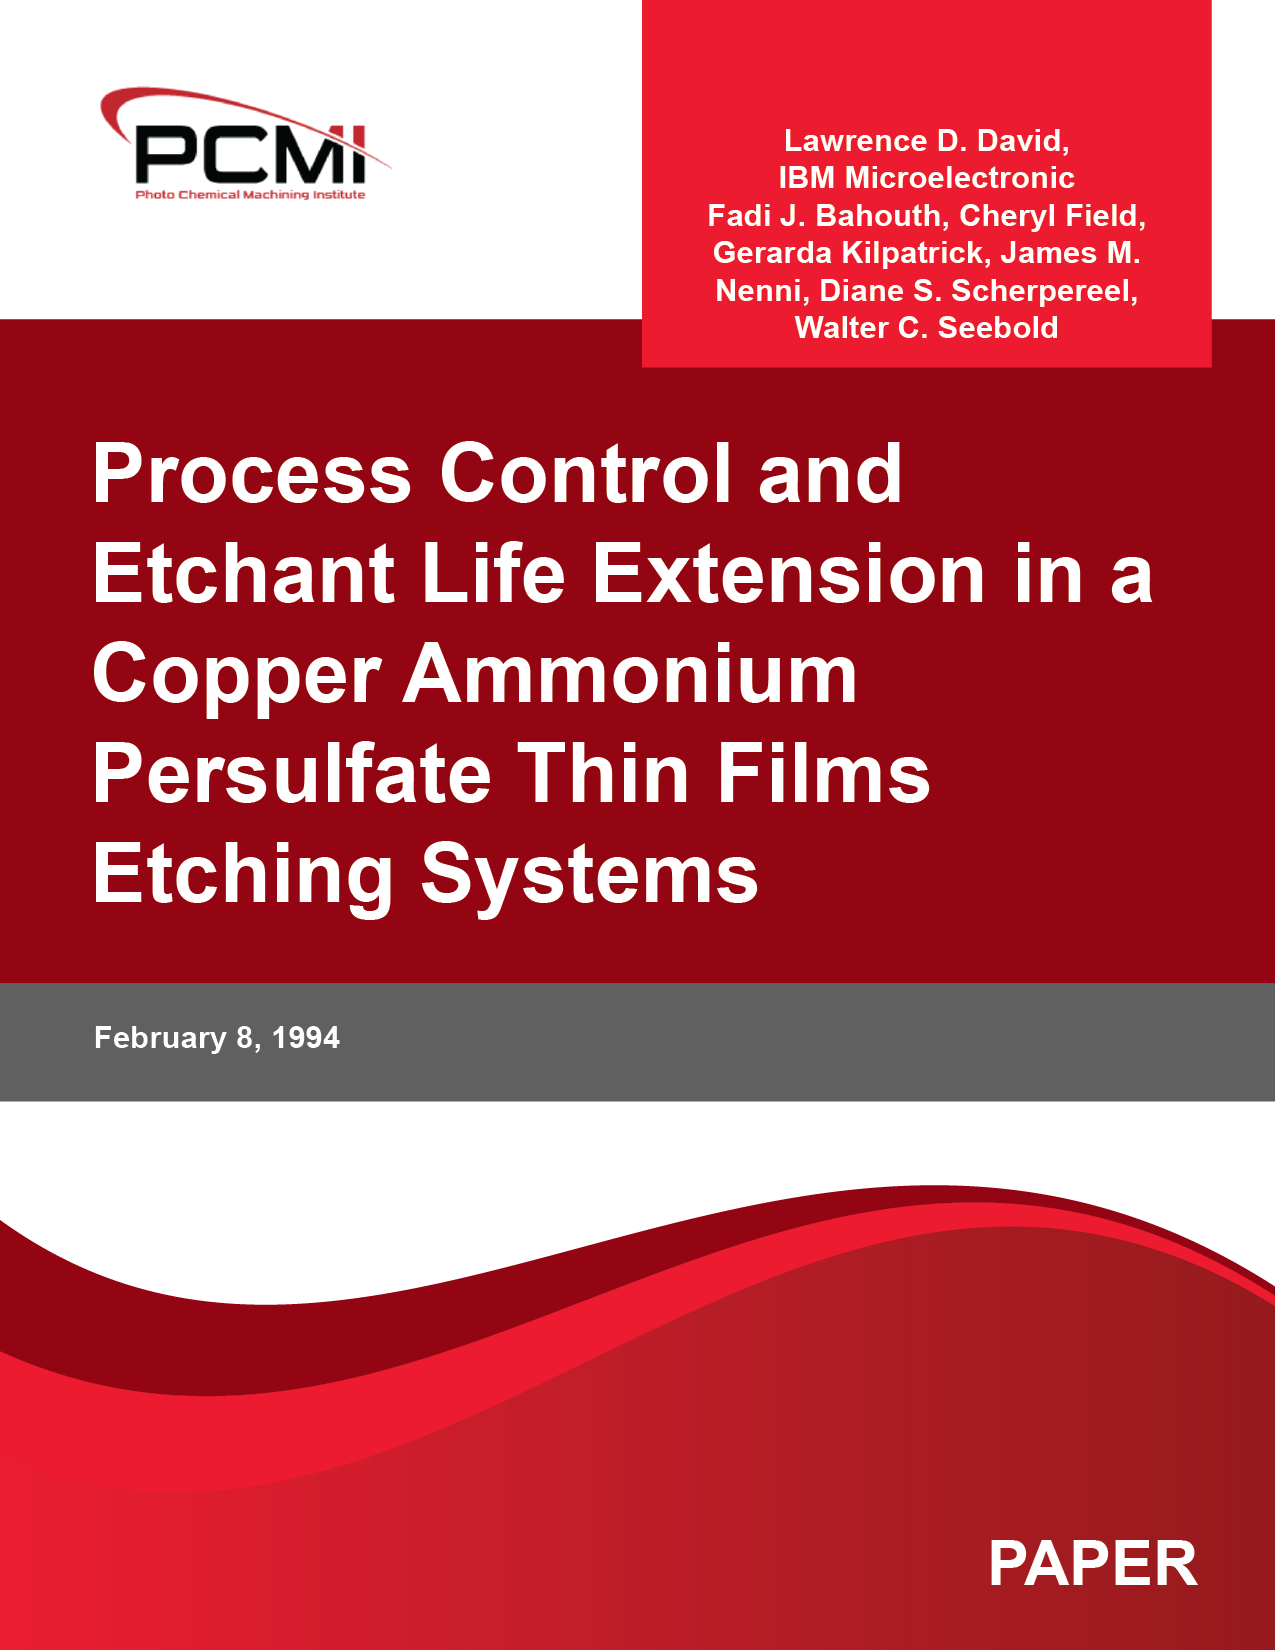 Process Control and Etchant Life Extension in a Copper Ammonium Persulfate Thin Films Etching Systems